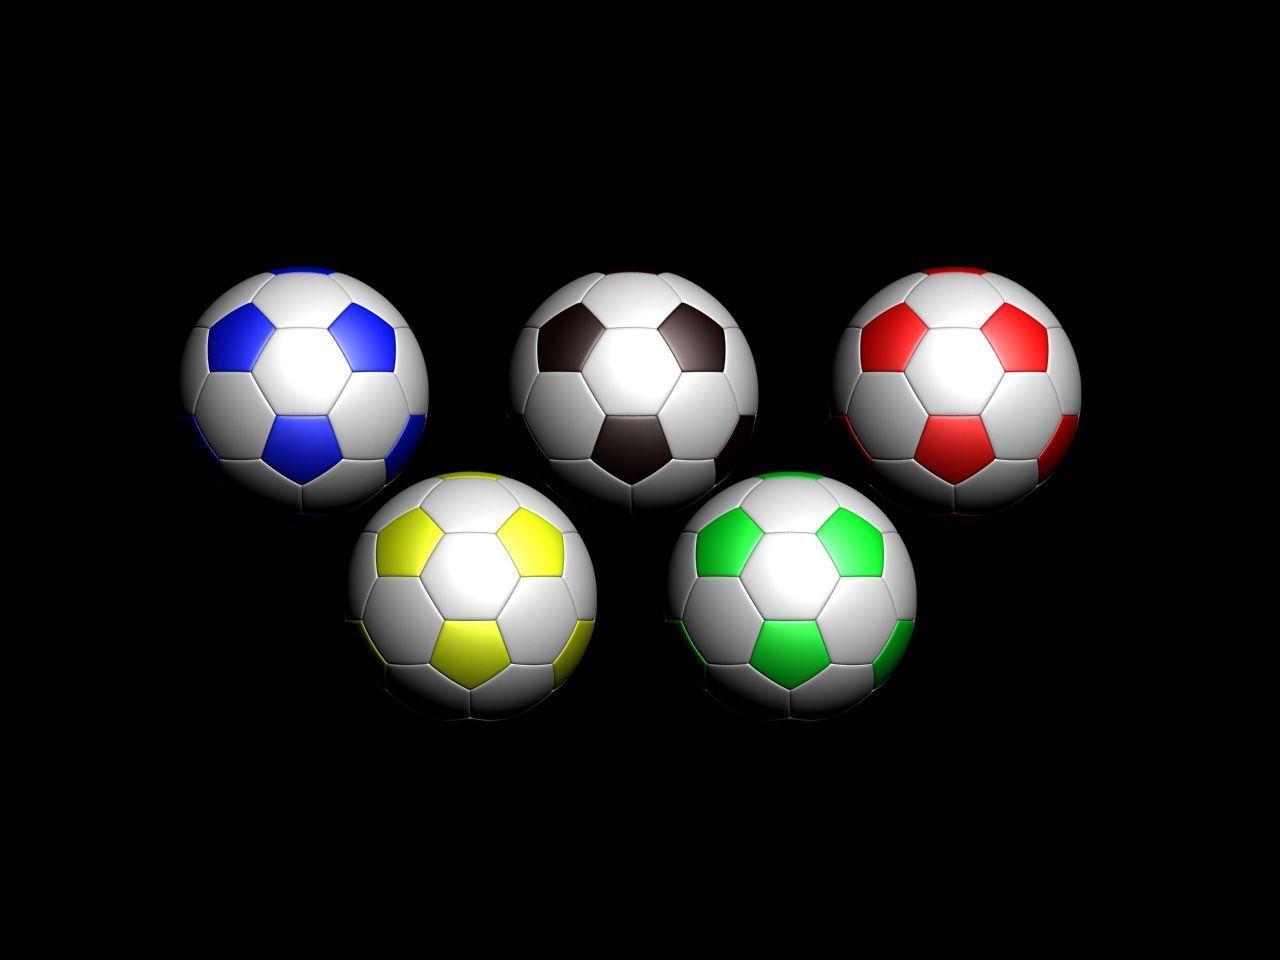 cool soccer wallpaper - Image And Wallpaper free to